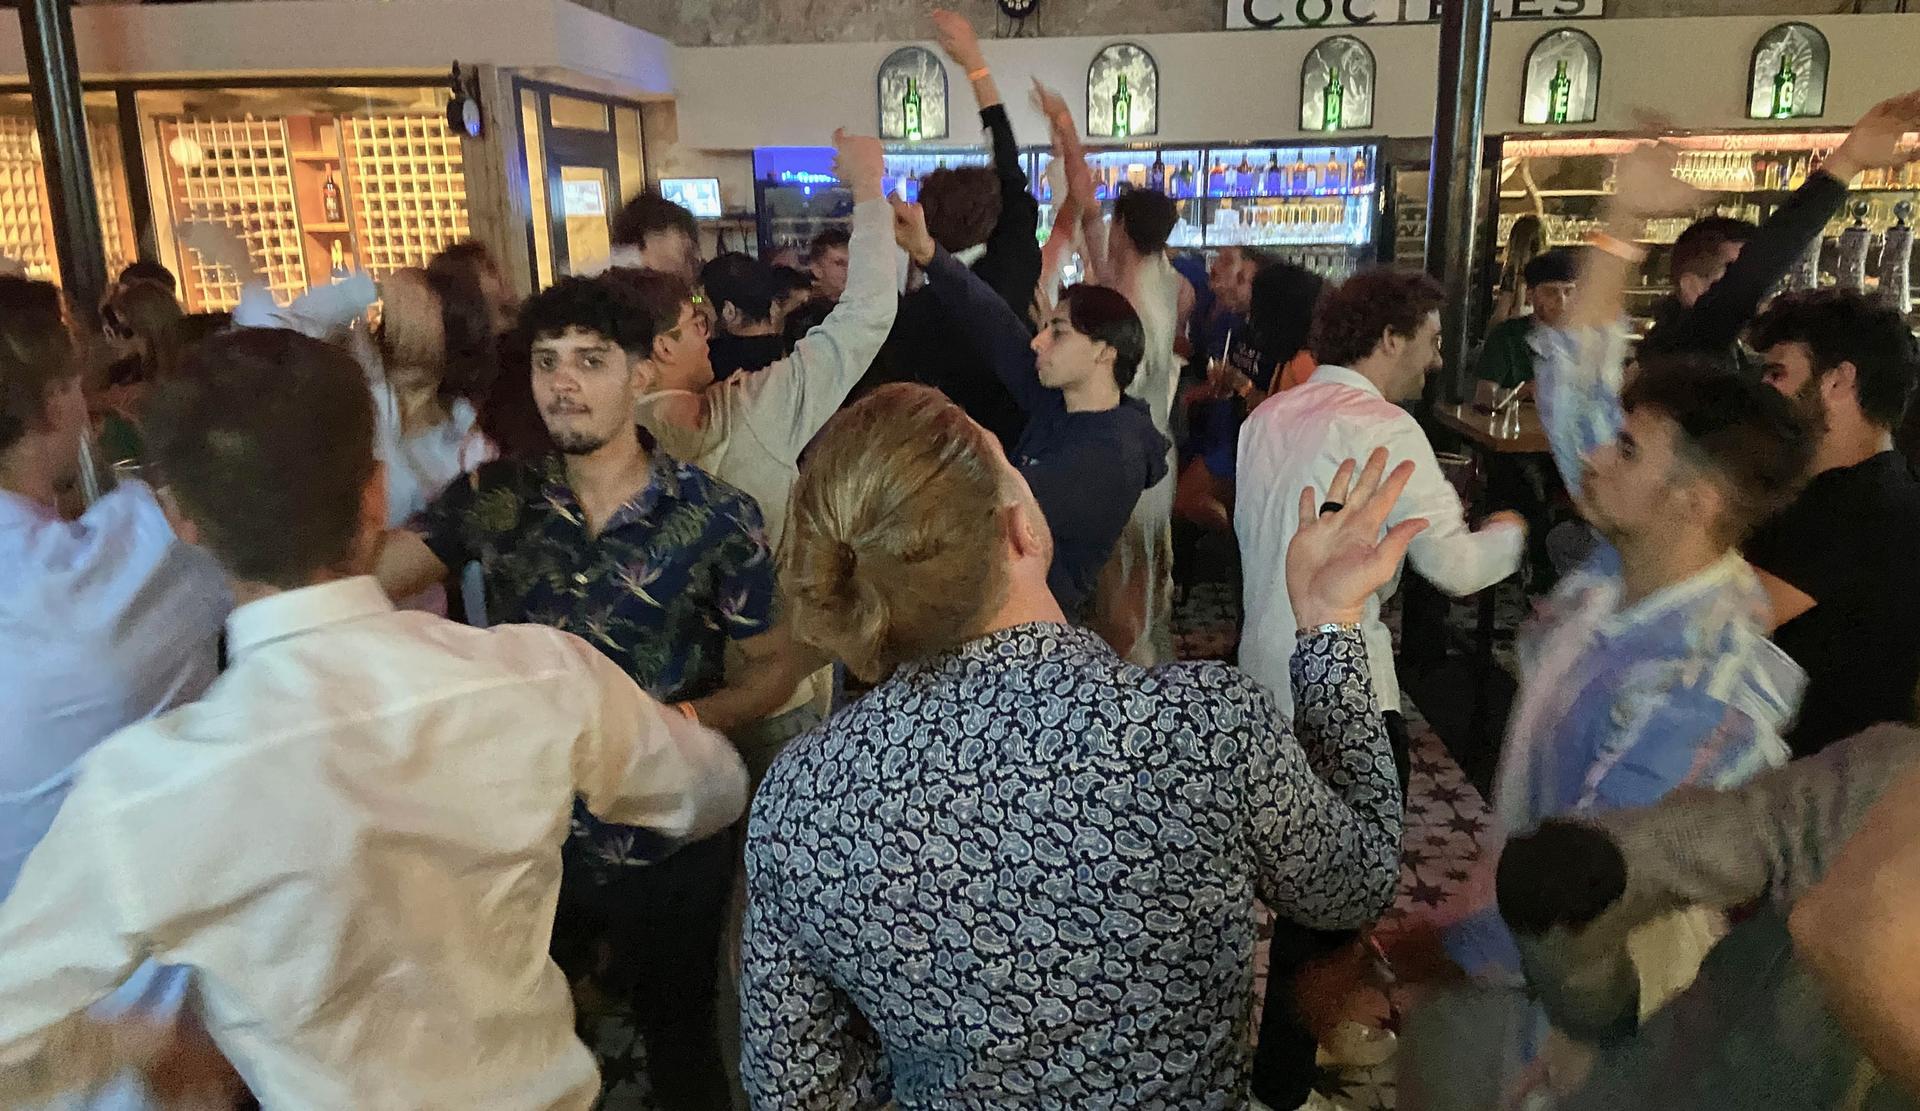 Teens in France couldn't go dancing for two years due to COVID-19. Now they're out in force. But the party's been dampened by people drugging drinks in attempts to exploit using 